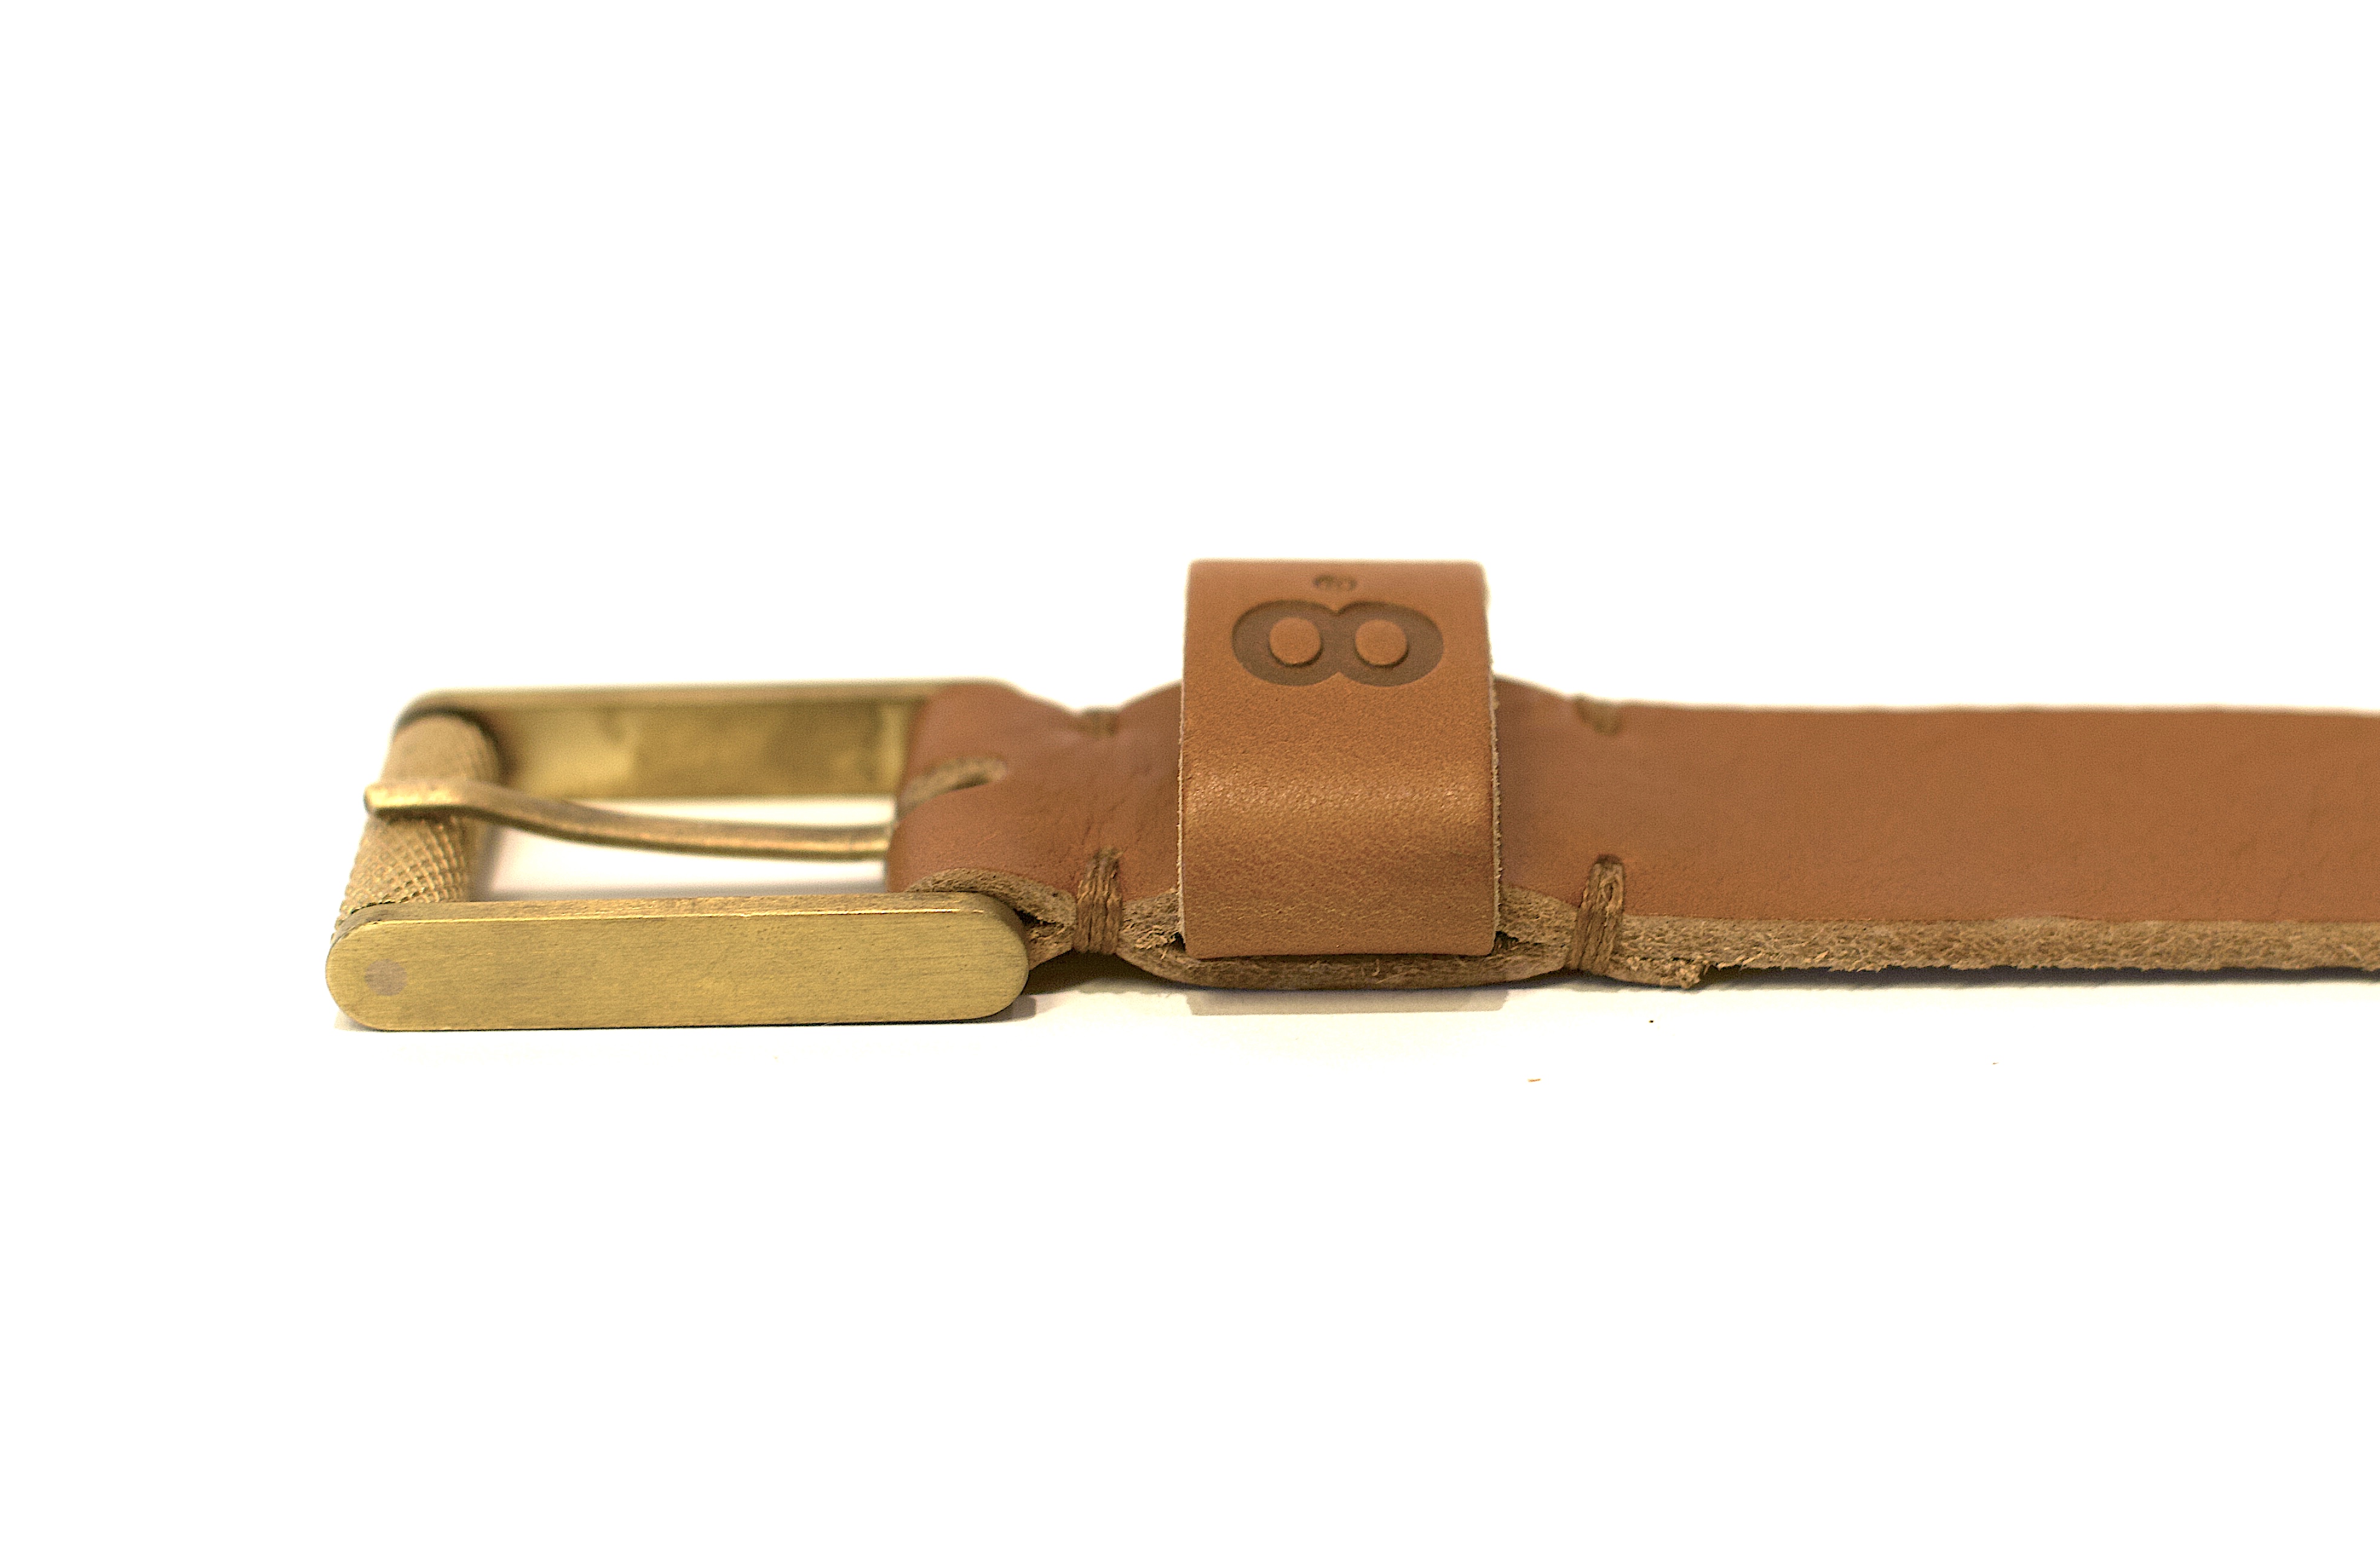 Leather cognac belt with brass buckle by Butts and Shoulders